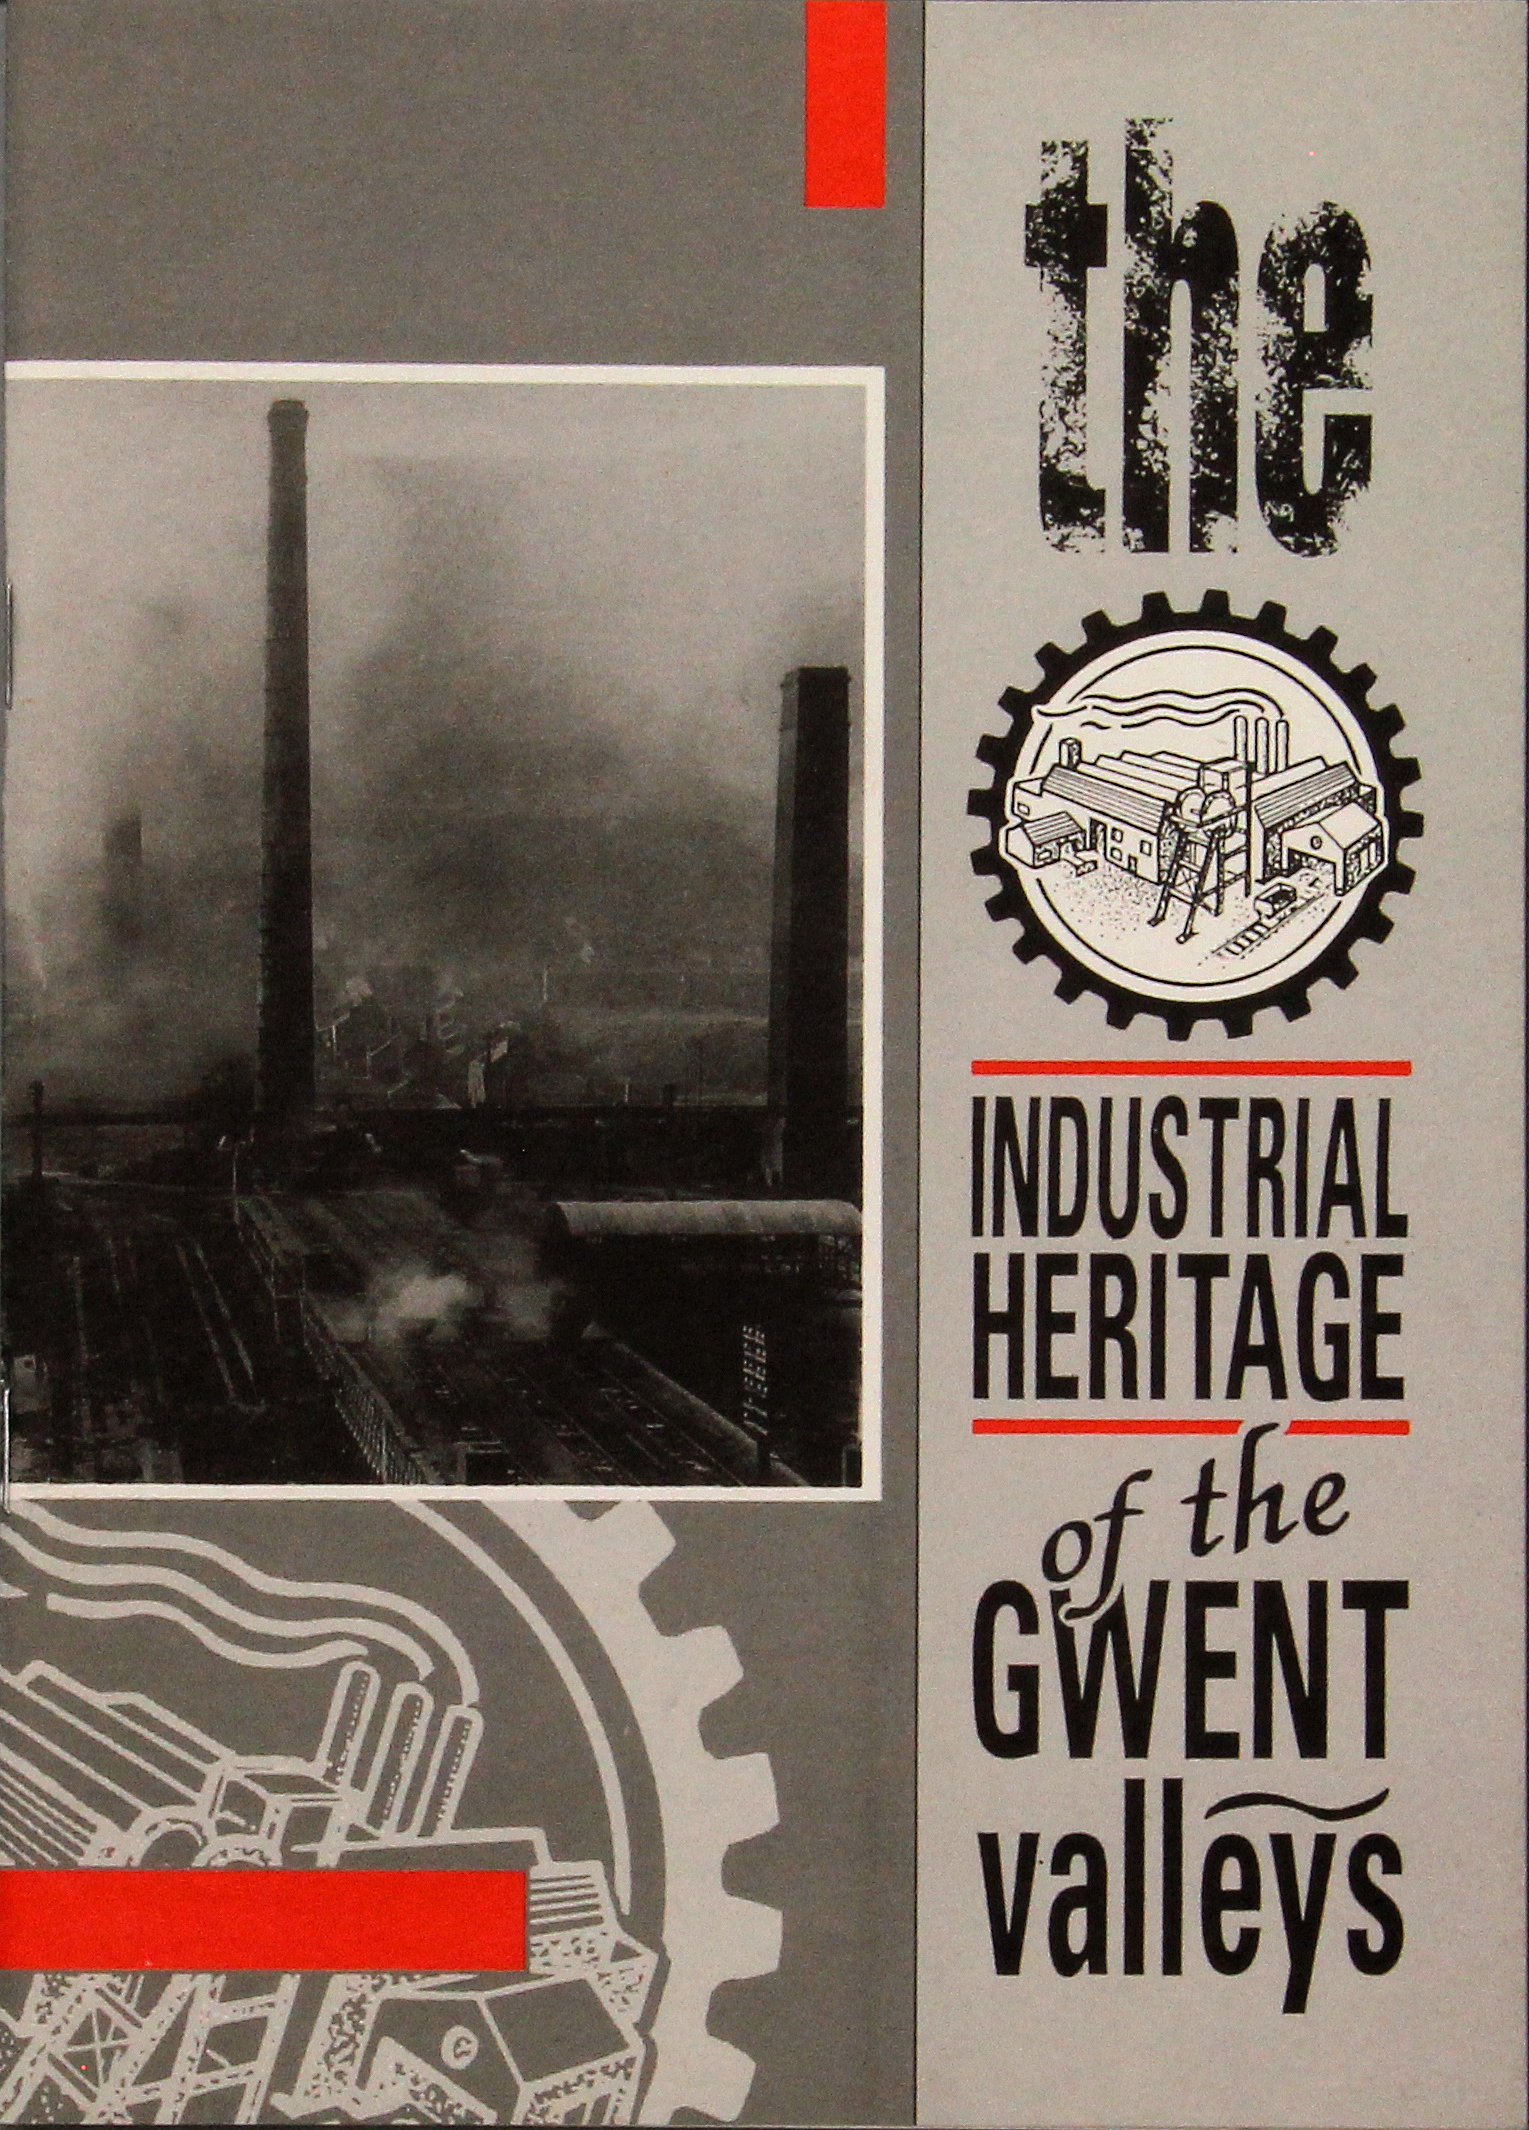 Industrial Heritage of the Gwent Valleys, Gwent County Council, 1992, £1.50